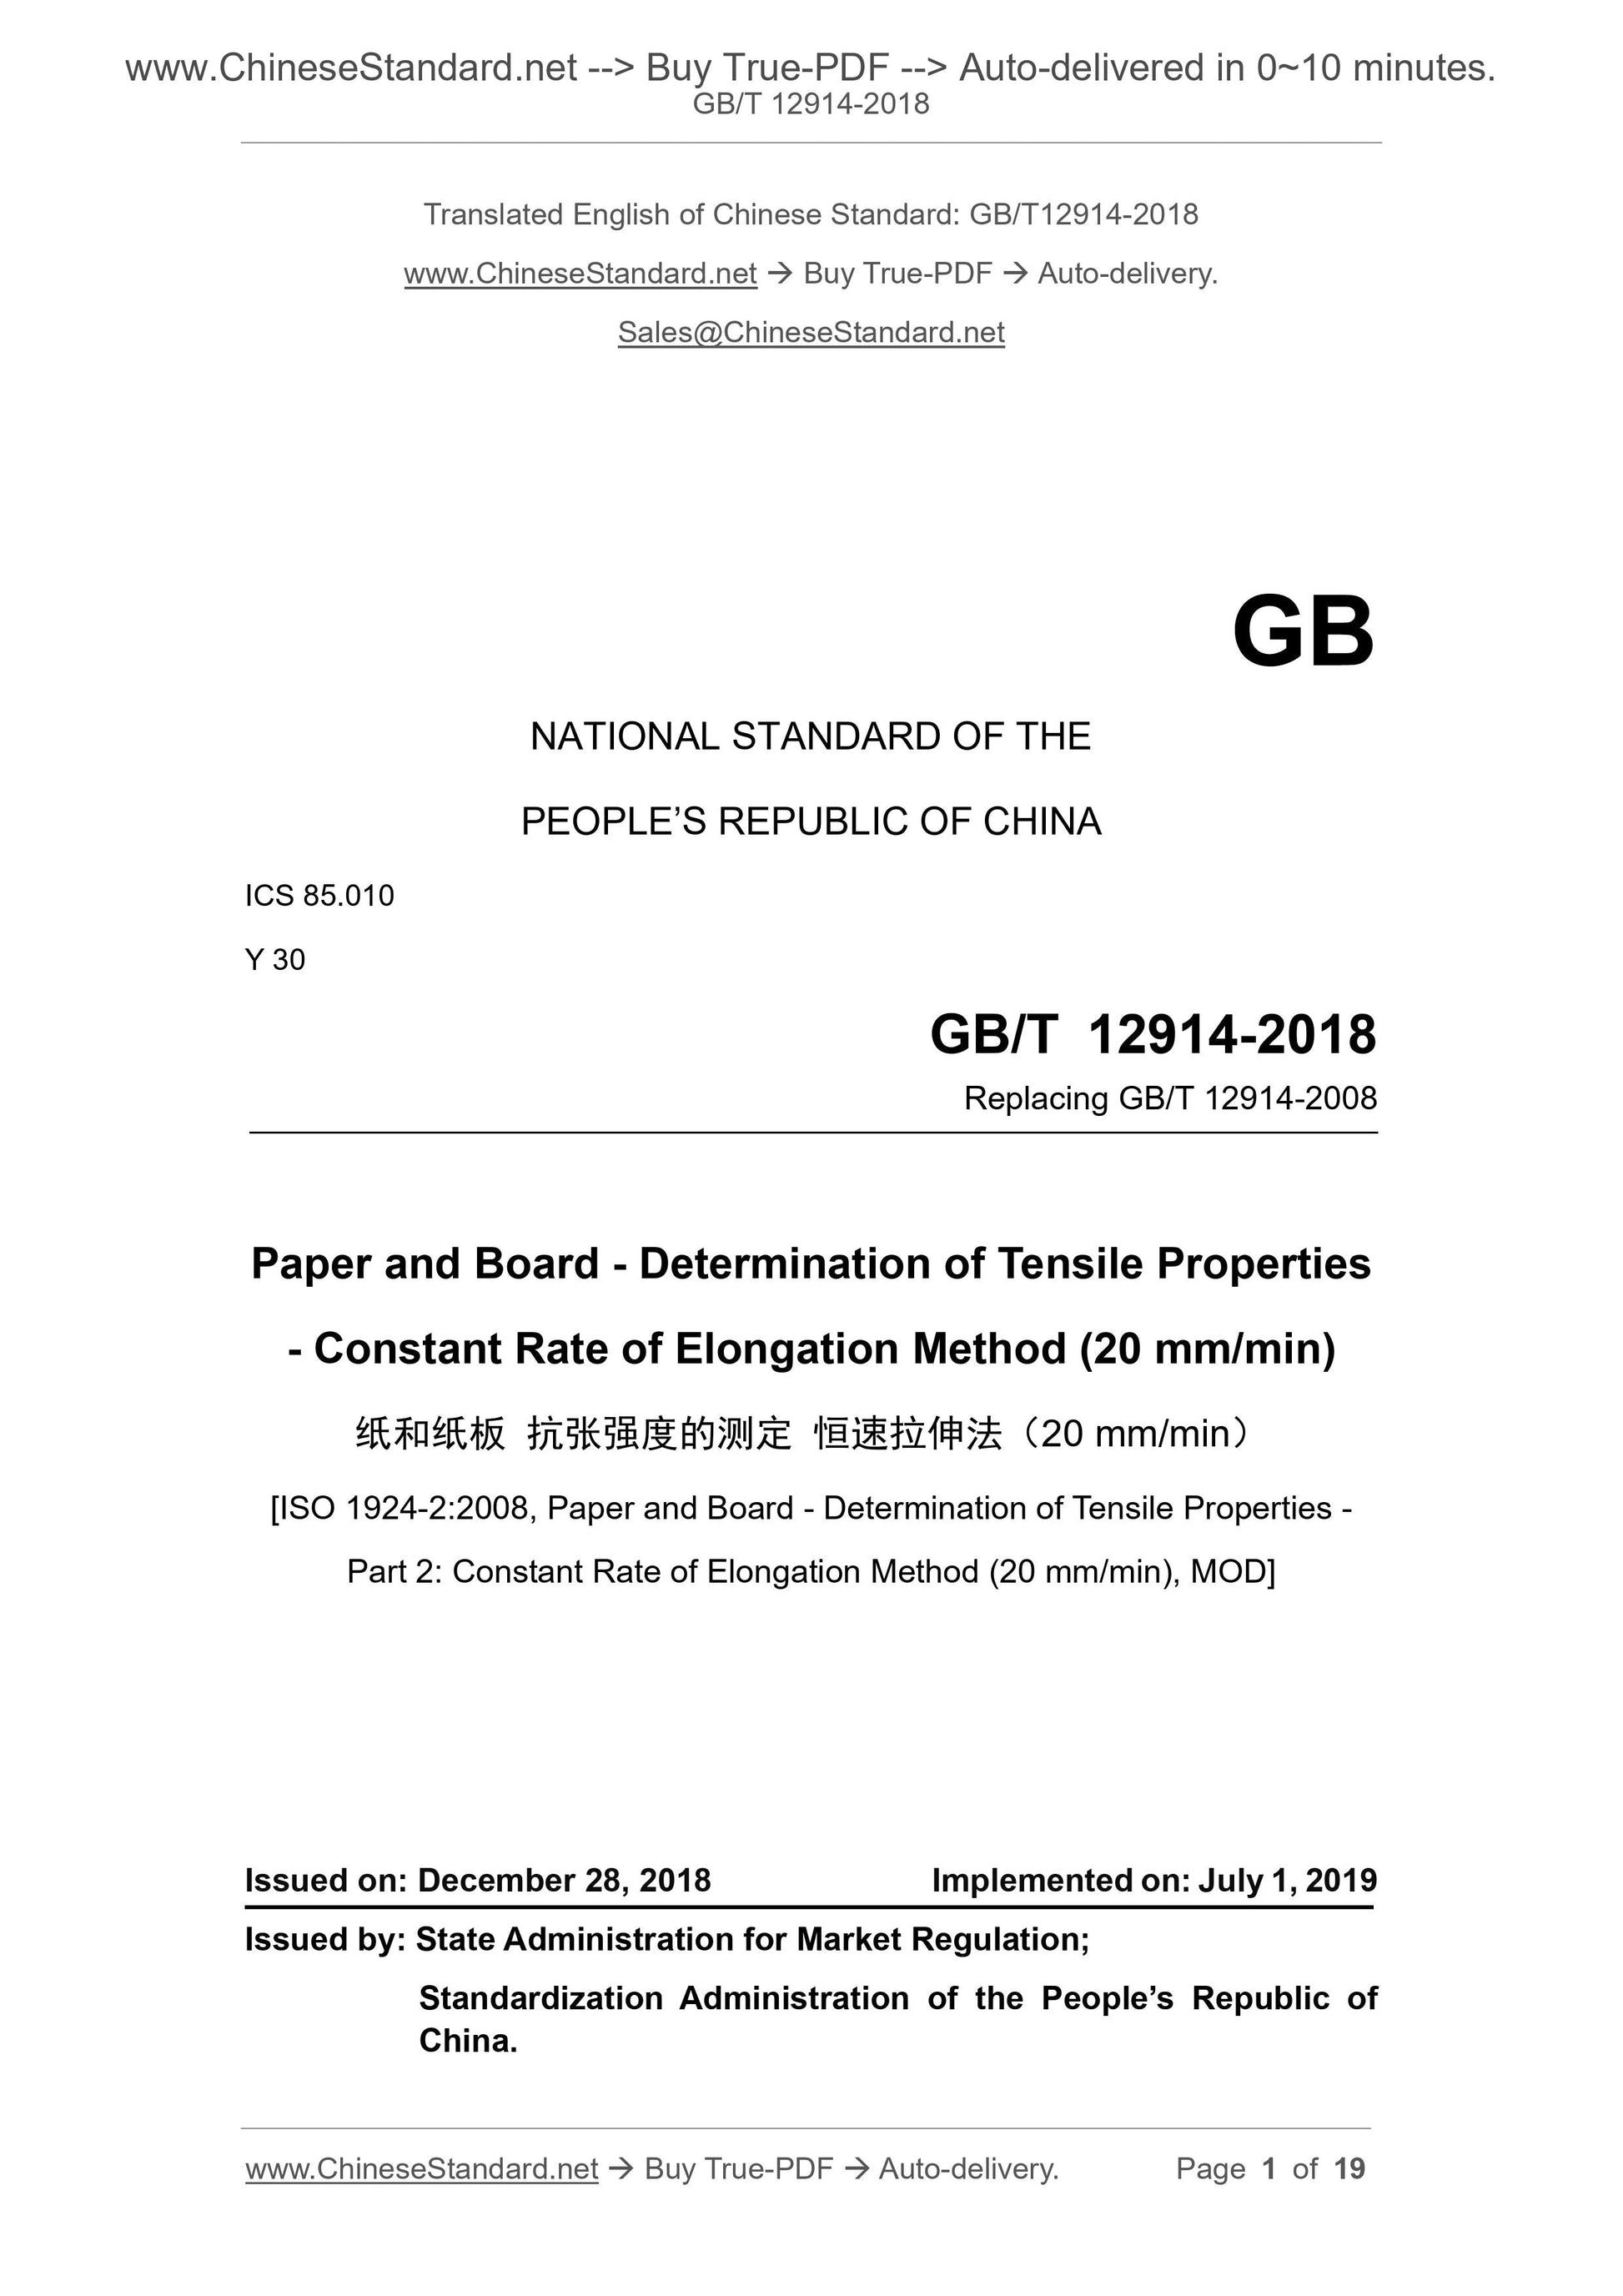 GB/T 12914-2018 Page 1